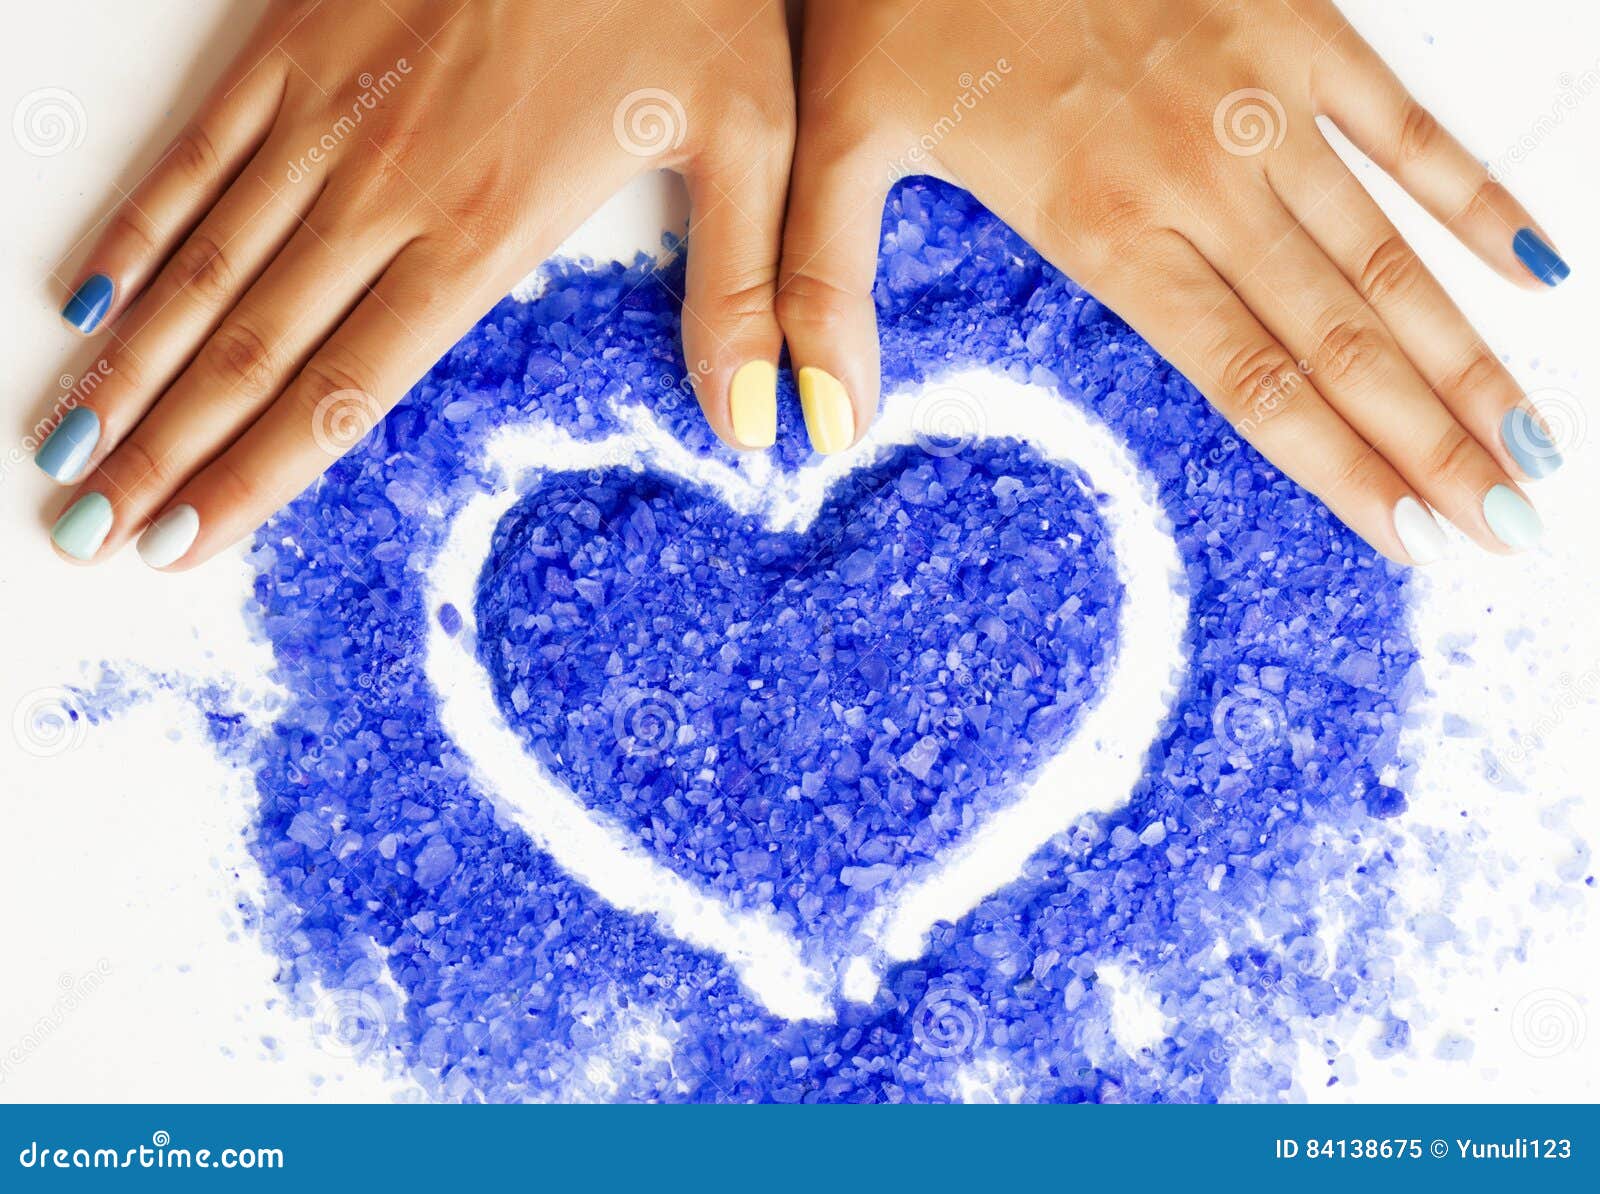 manicure with blue nails and seasalt close up like heart, love f